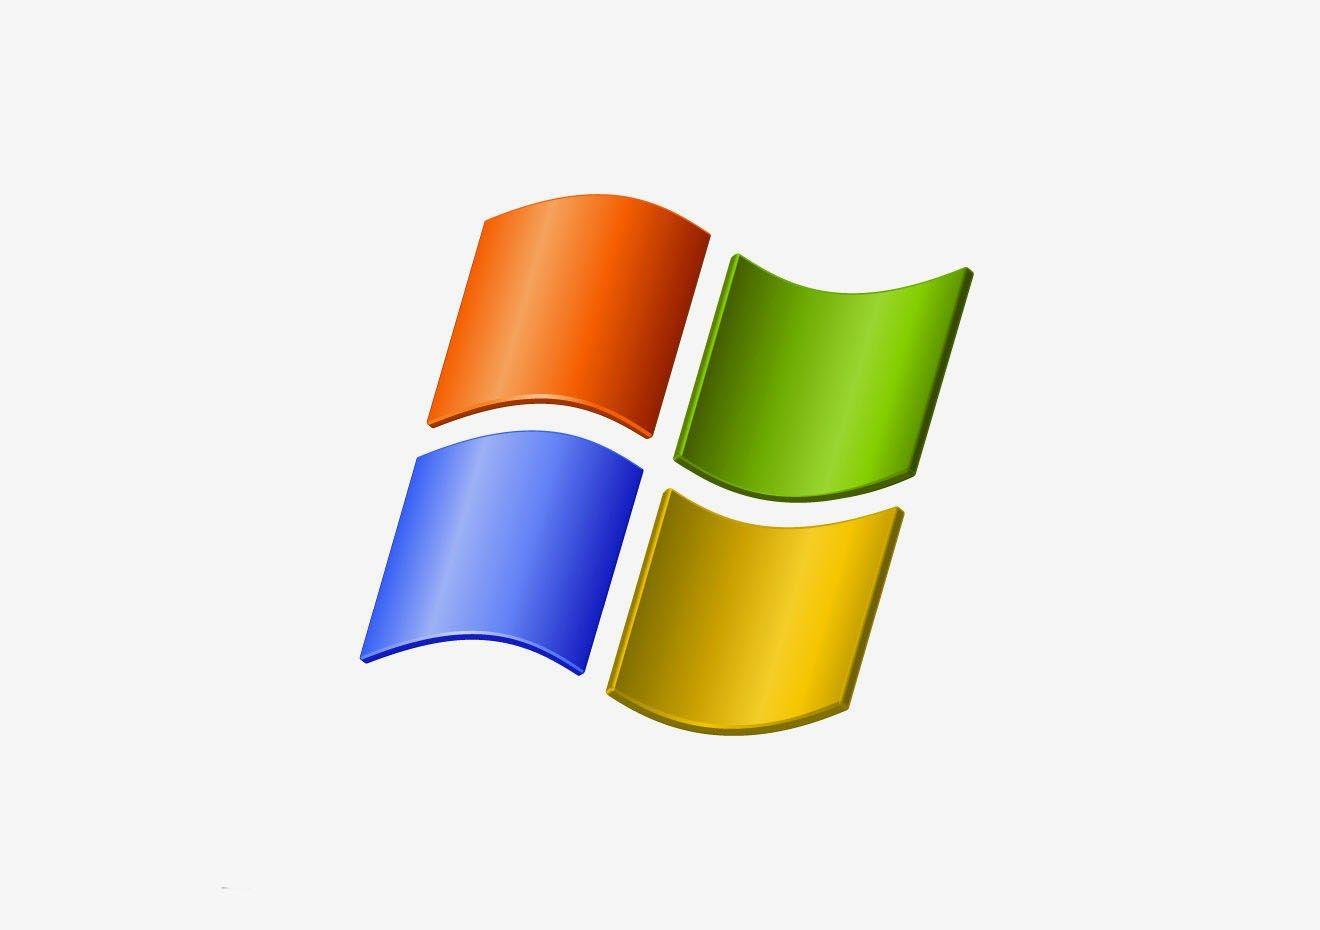 Oldest Microsoft Windows Logo - Windows XP Makes Ransomware and Other Threats So Much Worse